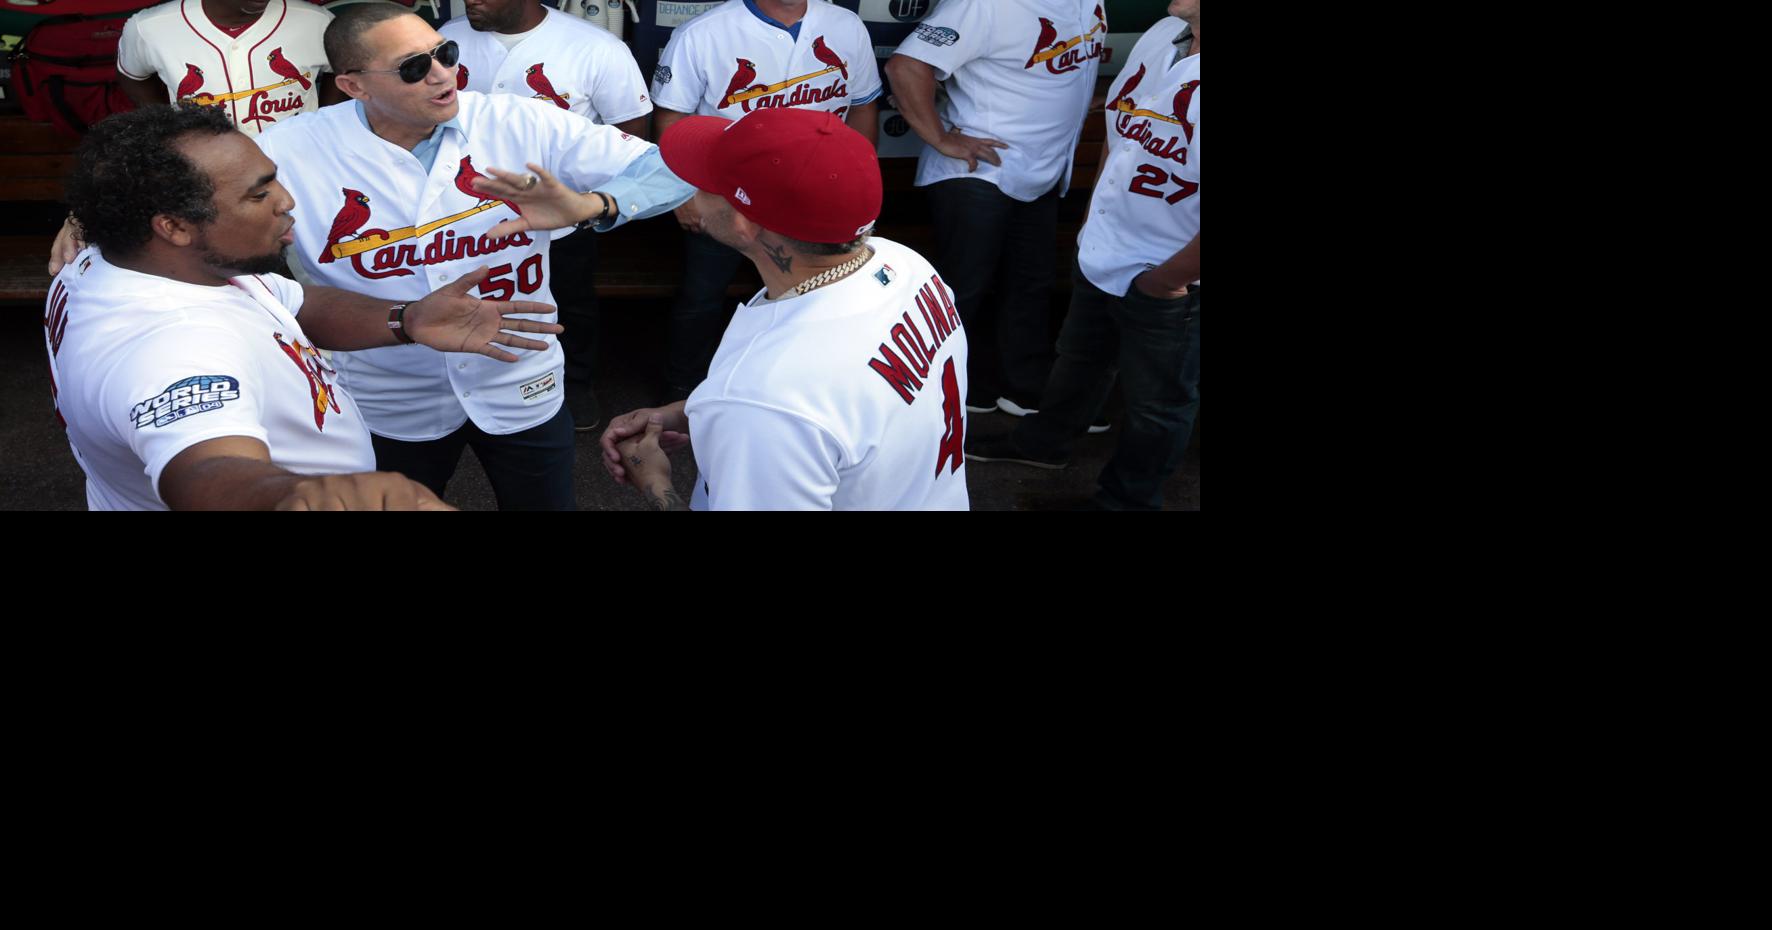 Ask A Cardinal: 2006 World Series Champions Edition, by Cardinals Insider